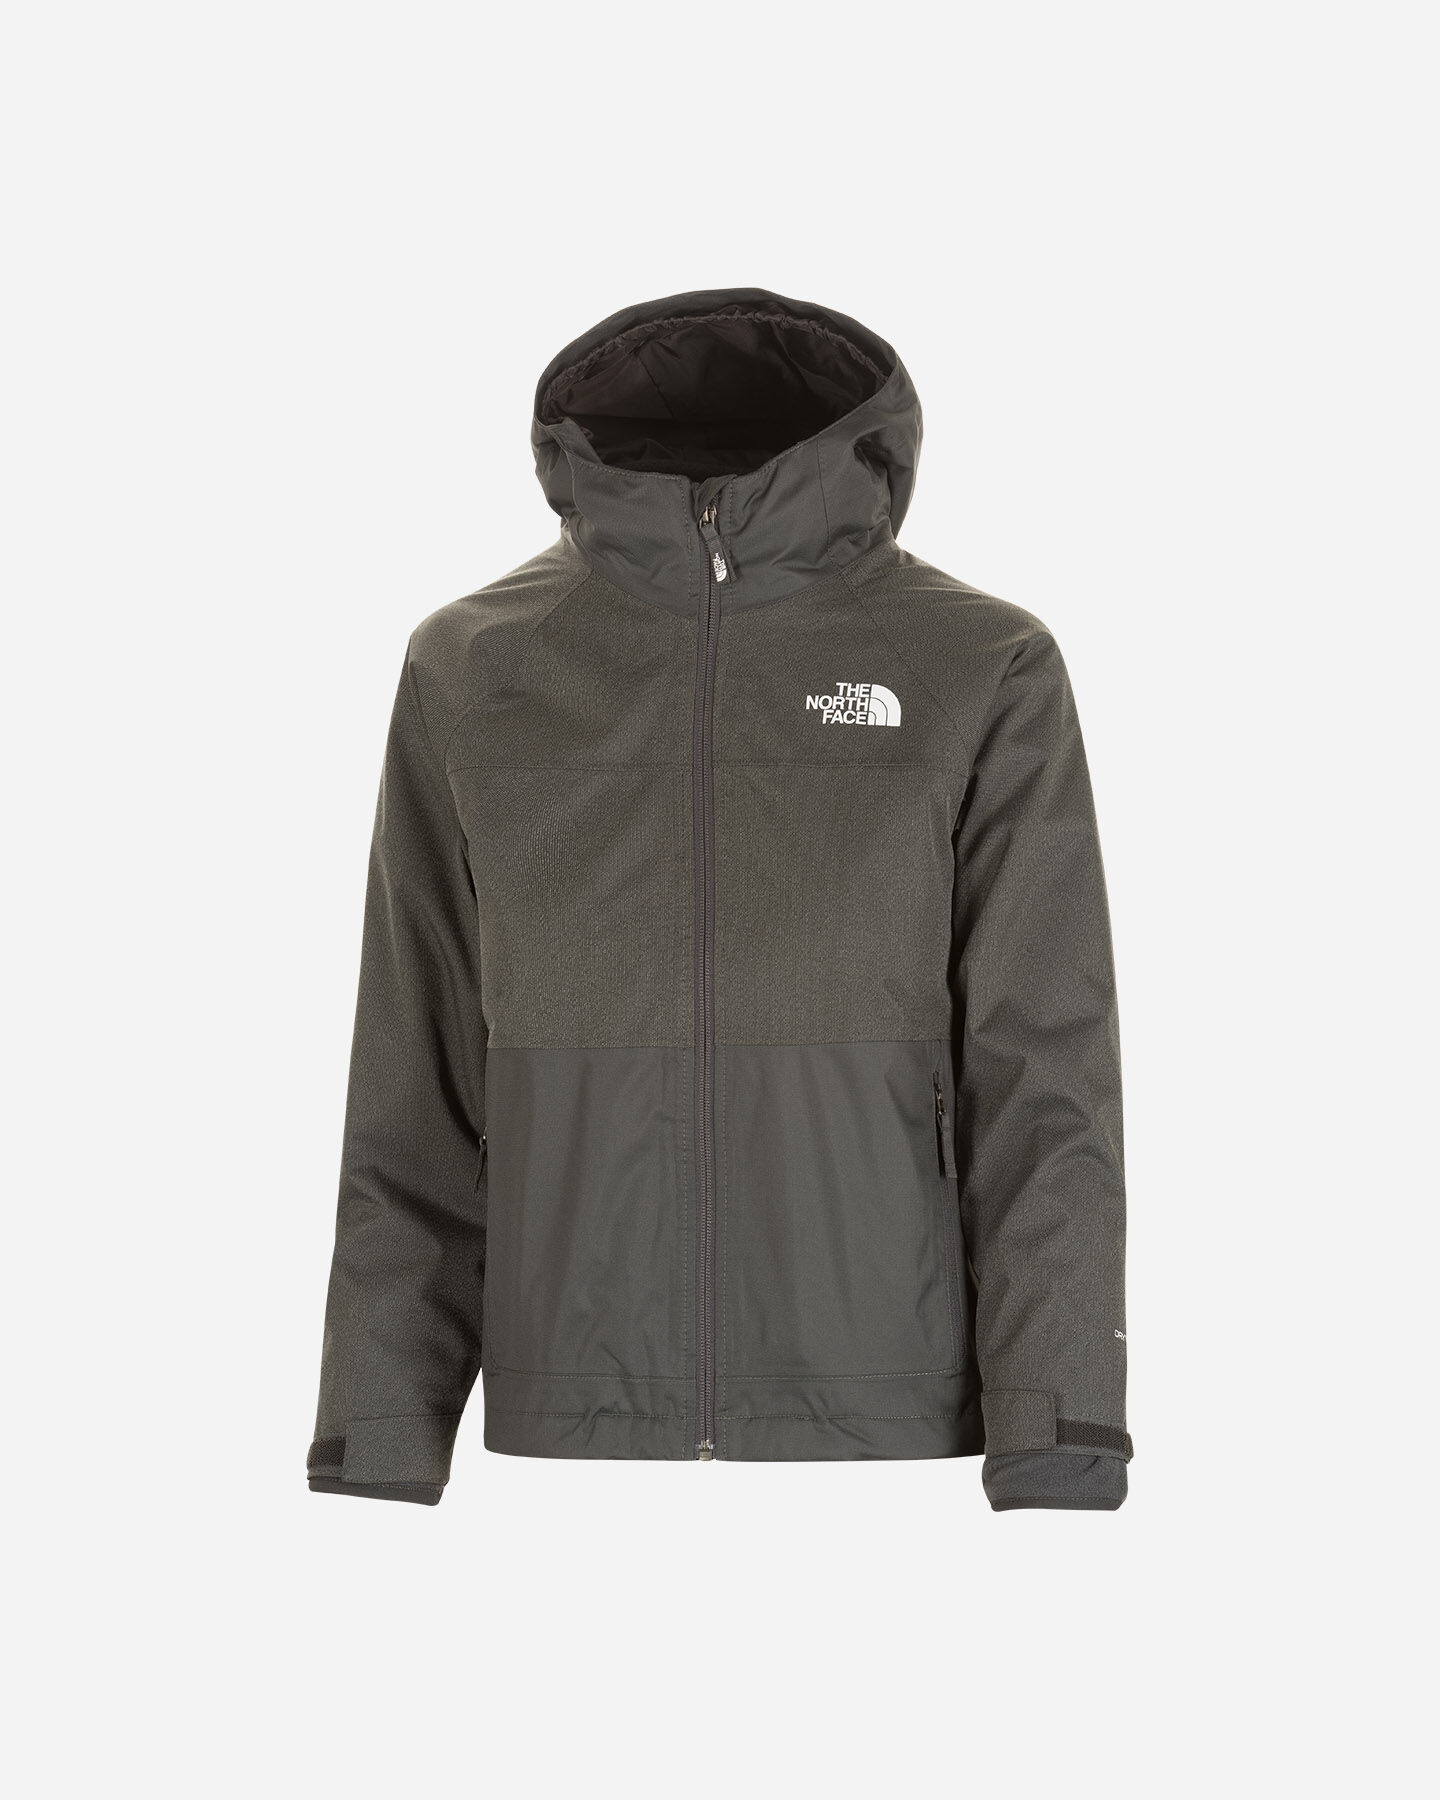  Giacca sci THE NORTH FACE VORTEX TRICLIMATE 2L JR S5348568|JCT|S scatto 0